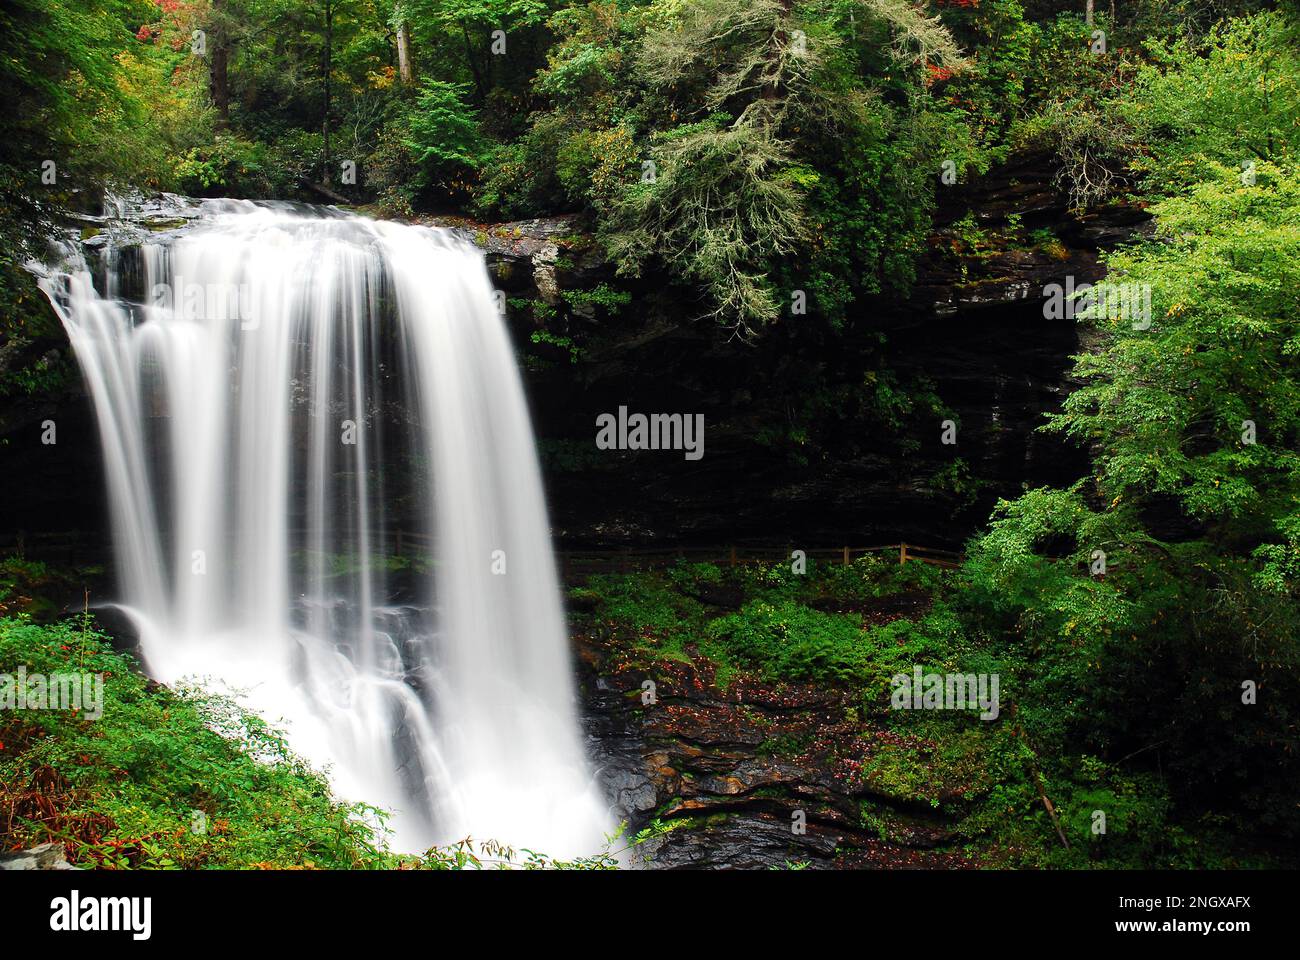 A serene waterfall flows in a lush forest Stock Photo